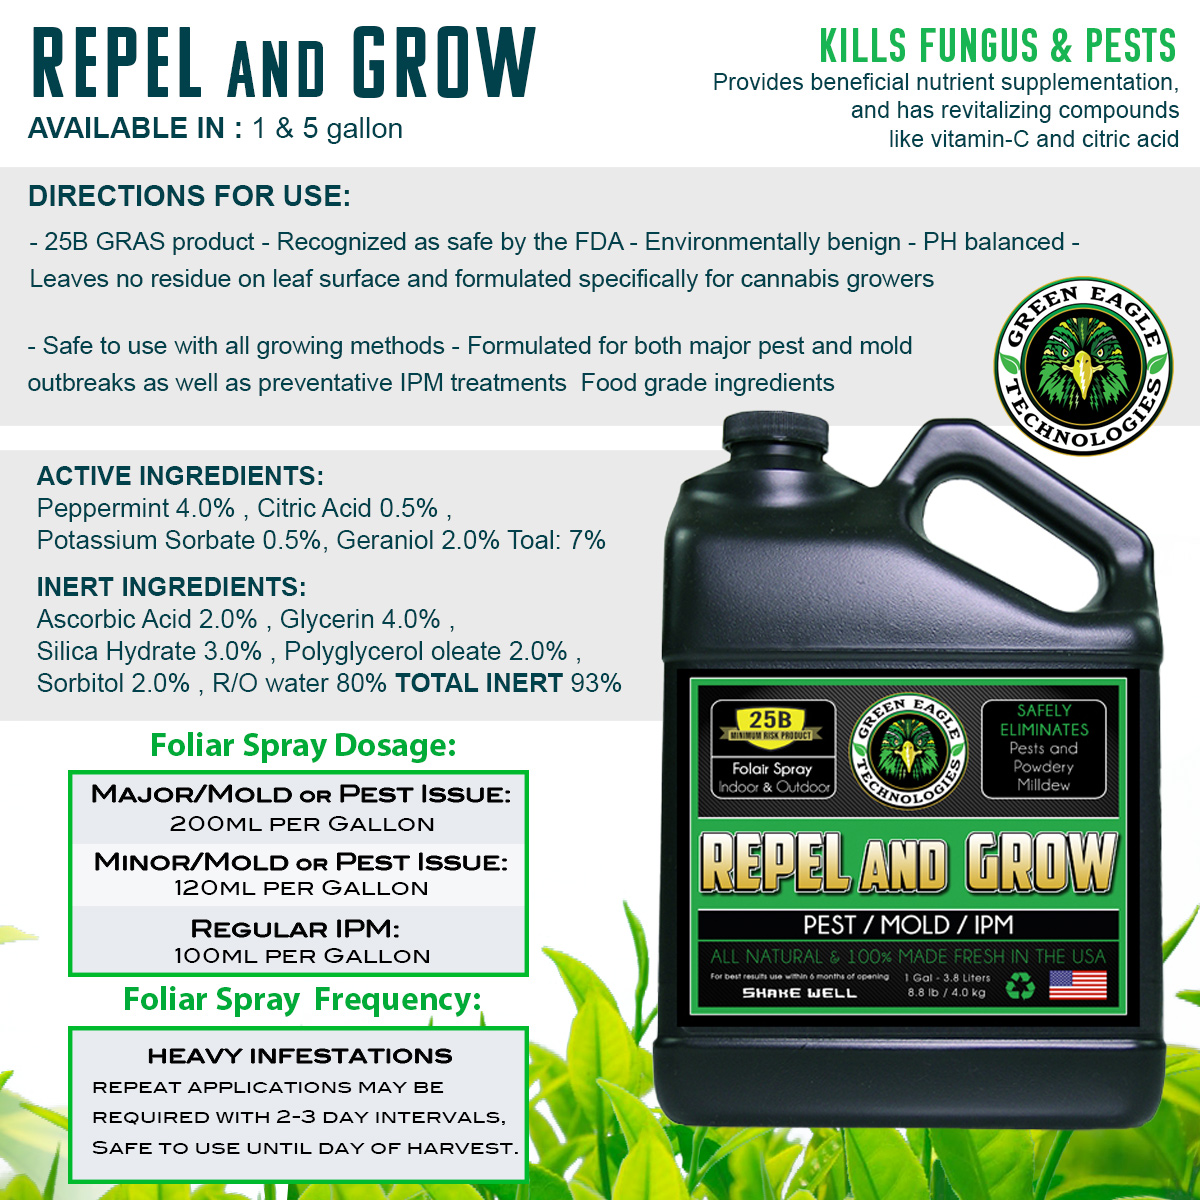 Repel and Grow by Green Eagle Technologies